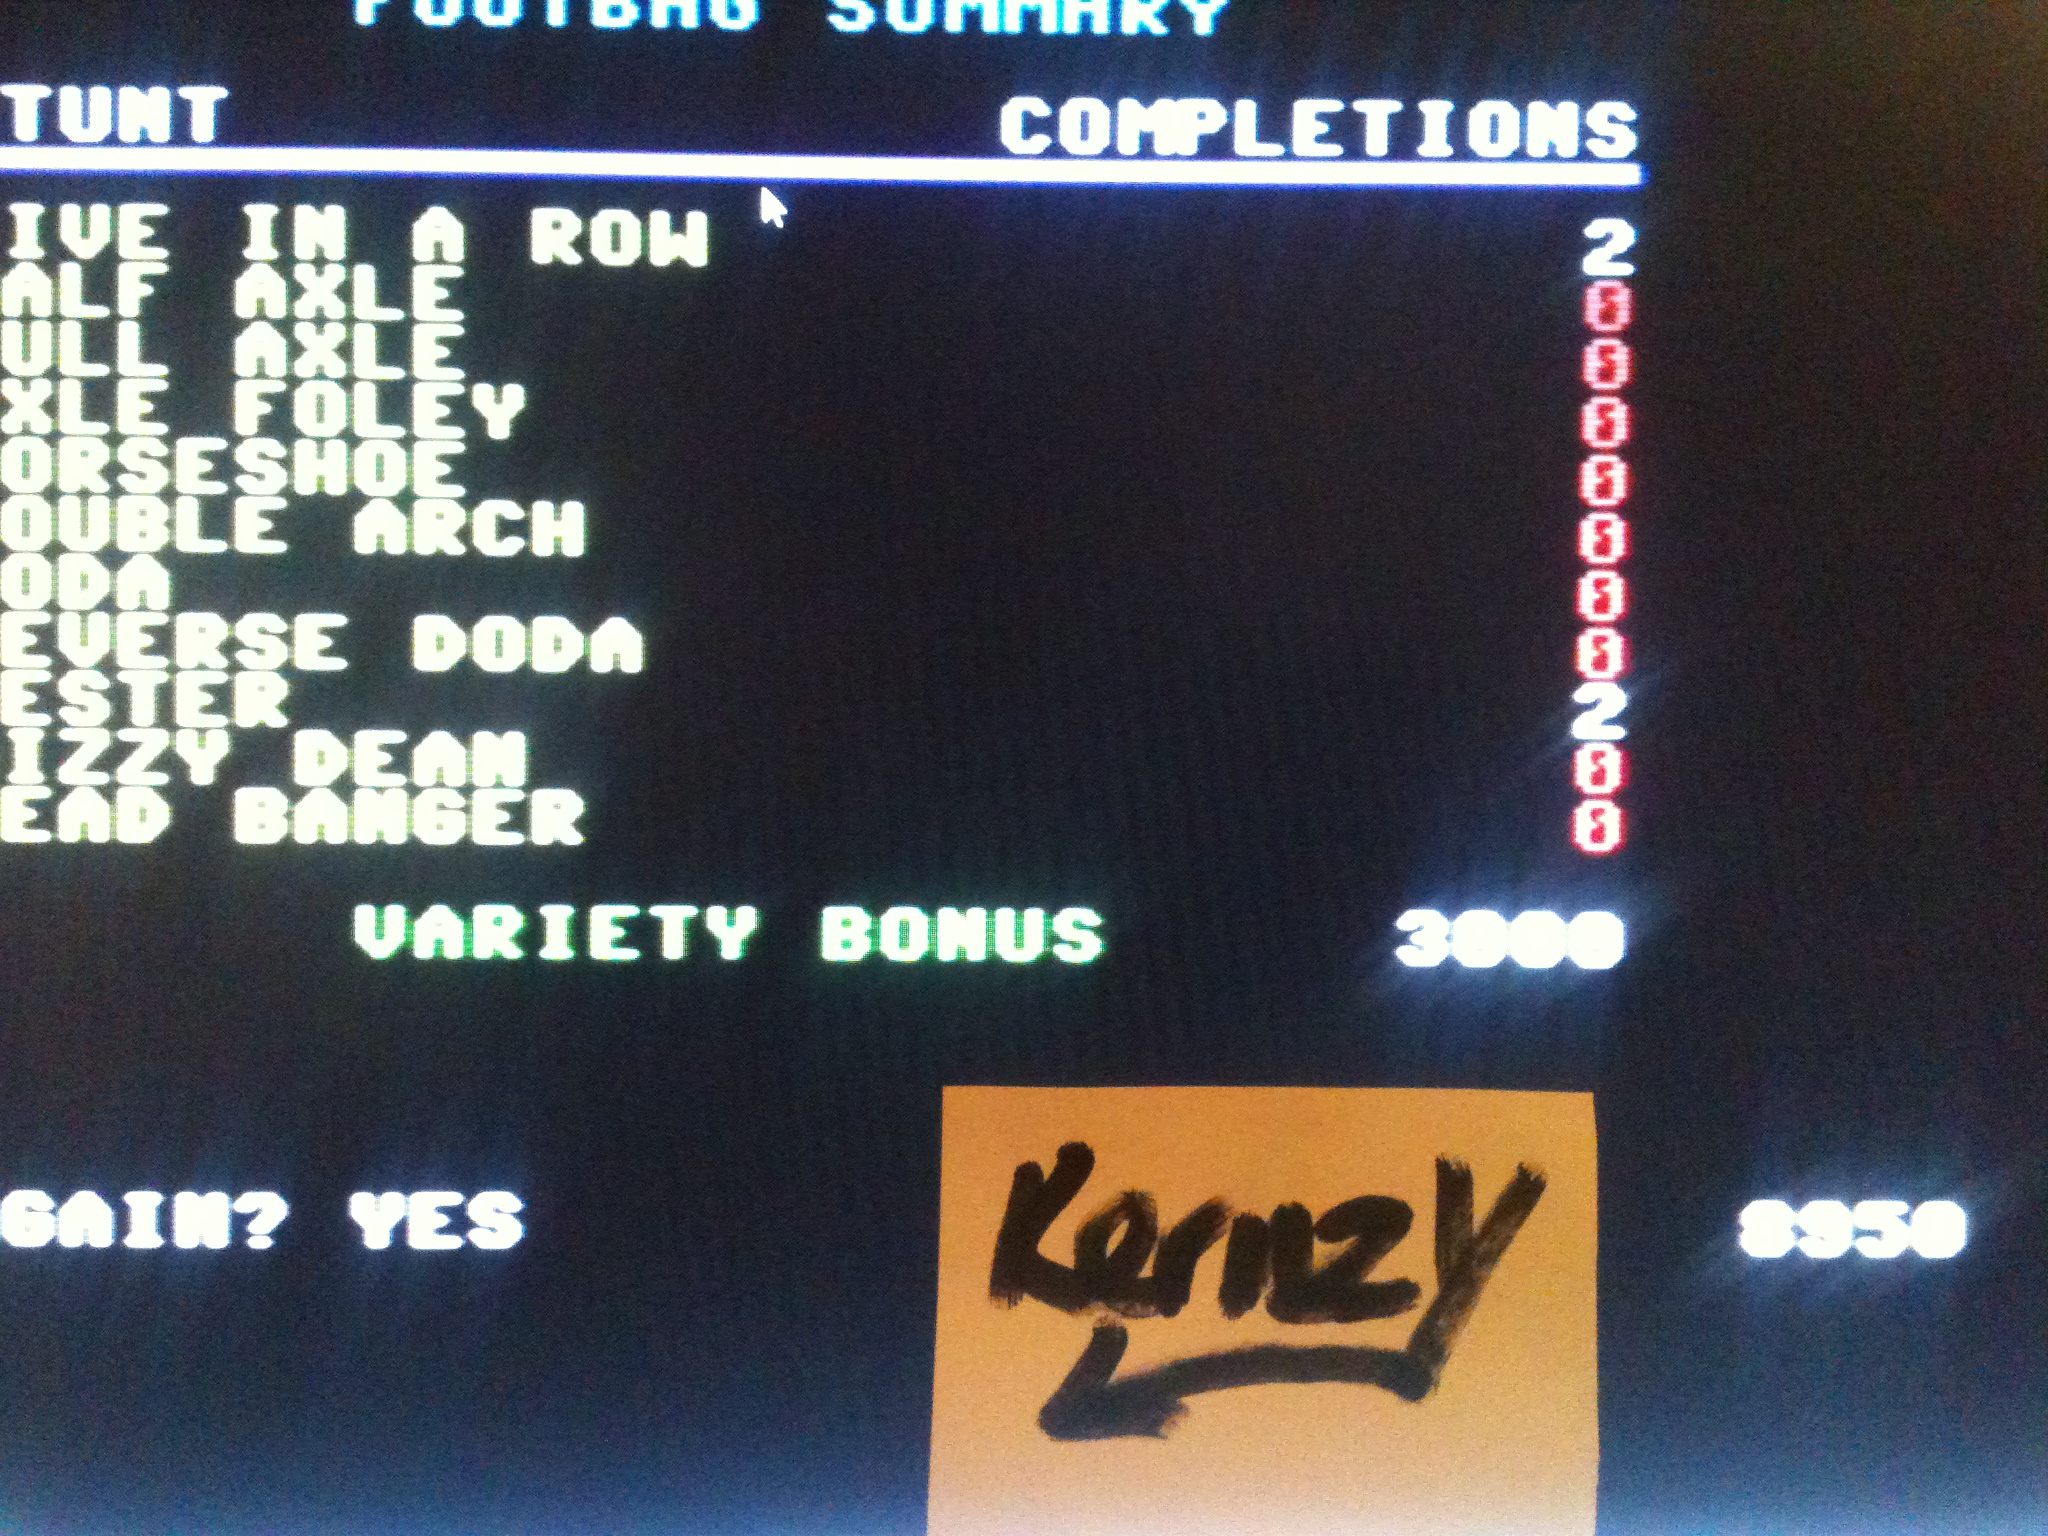 kernzy: California Games: Foot Bag (Commodore 64 Emulated) 8,950 points on 2015-05-08 14:22:48